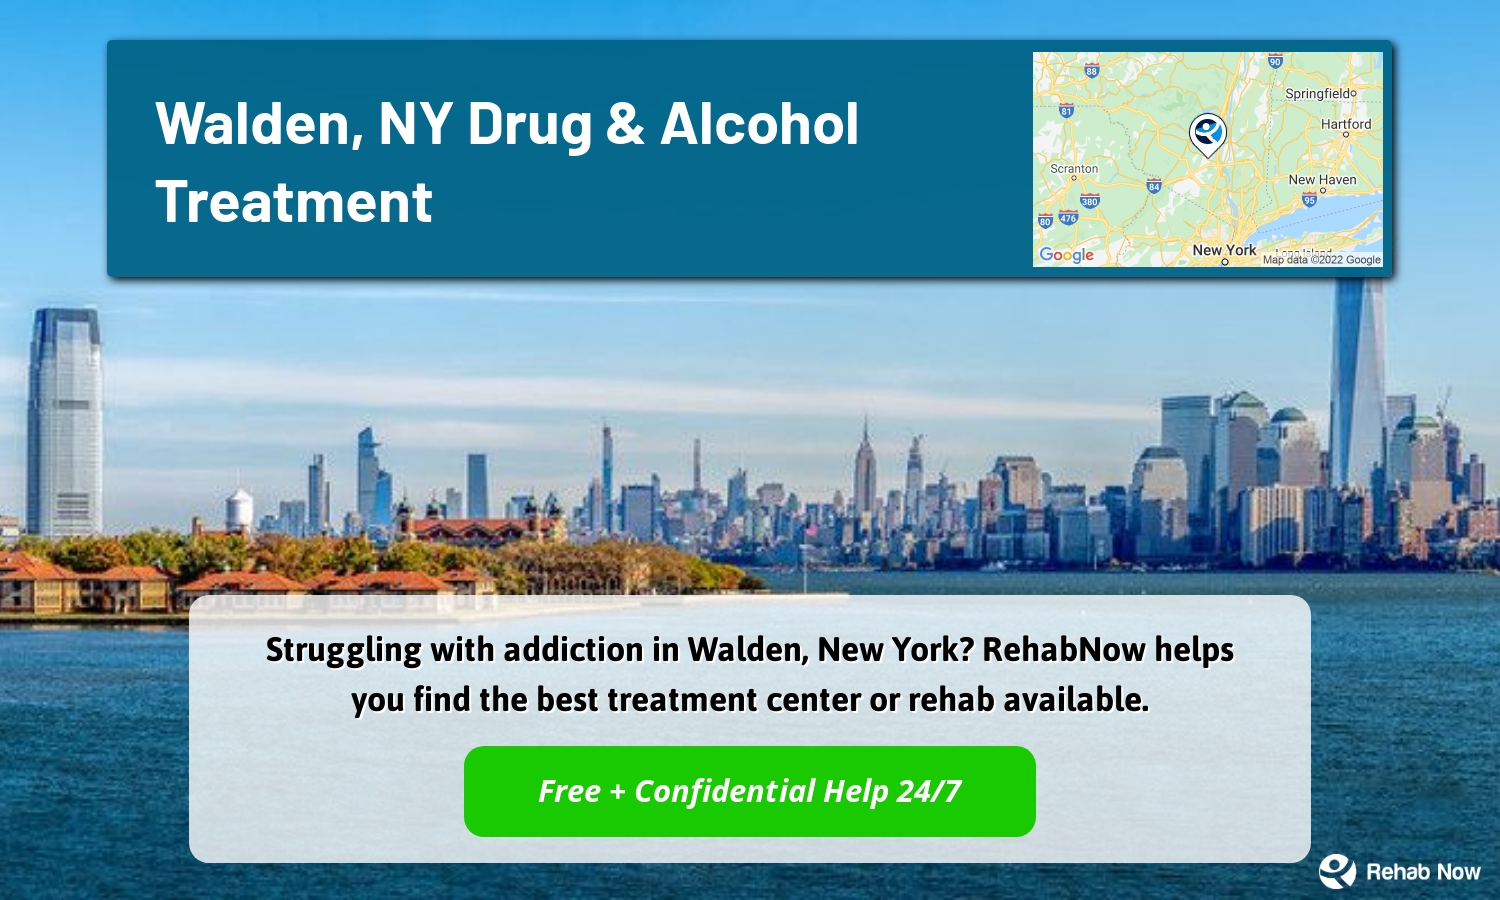 Struggling with addiction in Walden, New York? RehabNow helps you find the best treatment center or rehab available.